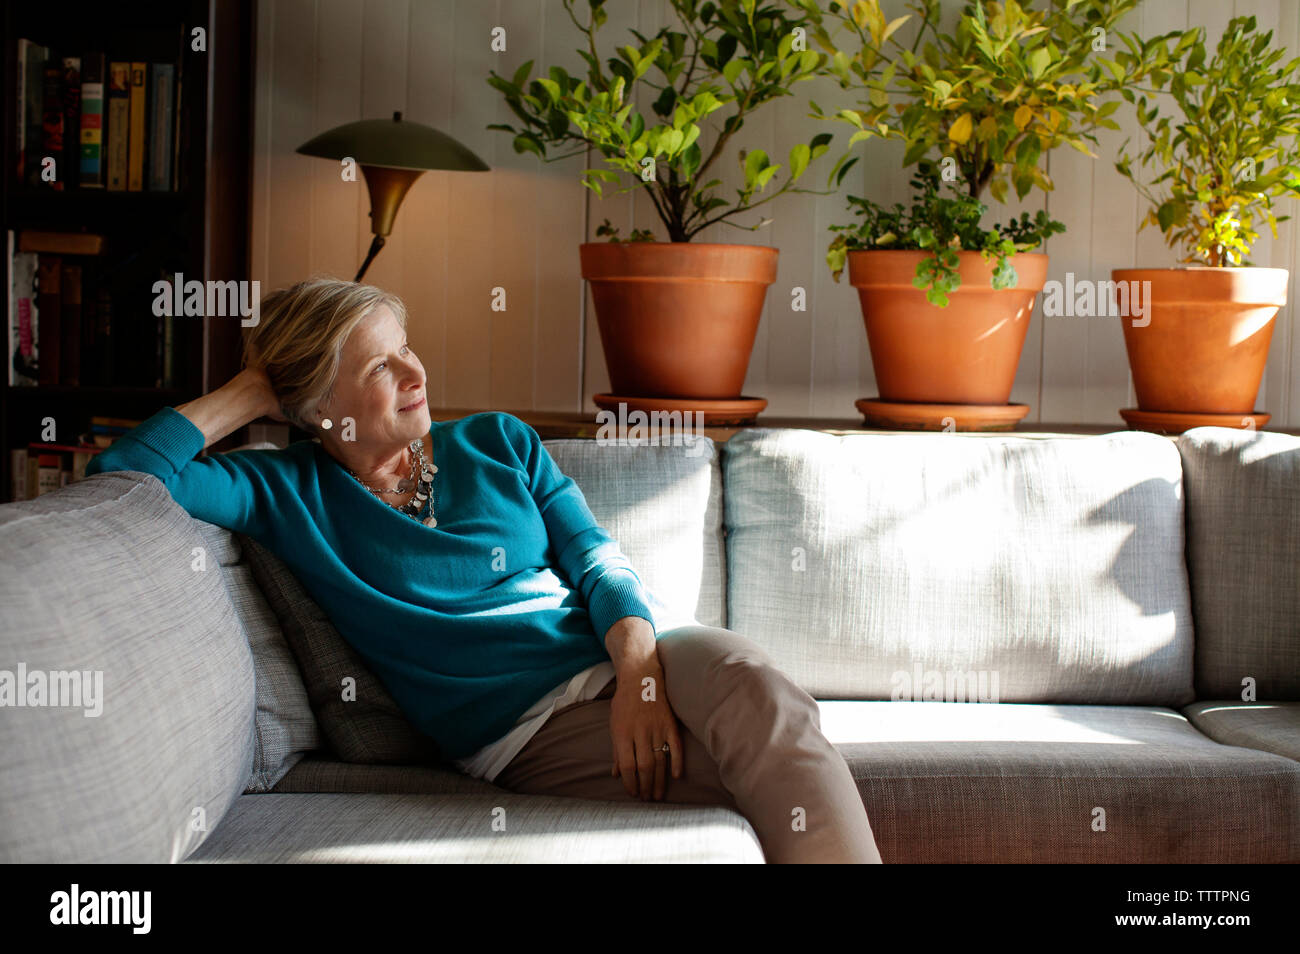 Thoughtful woman sitting on sofa at home Stock Photo